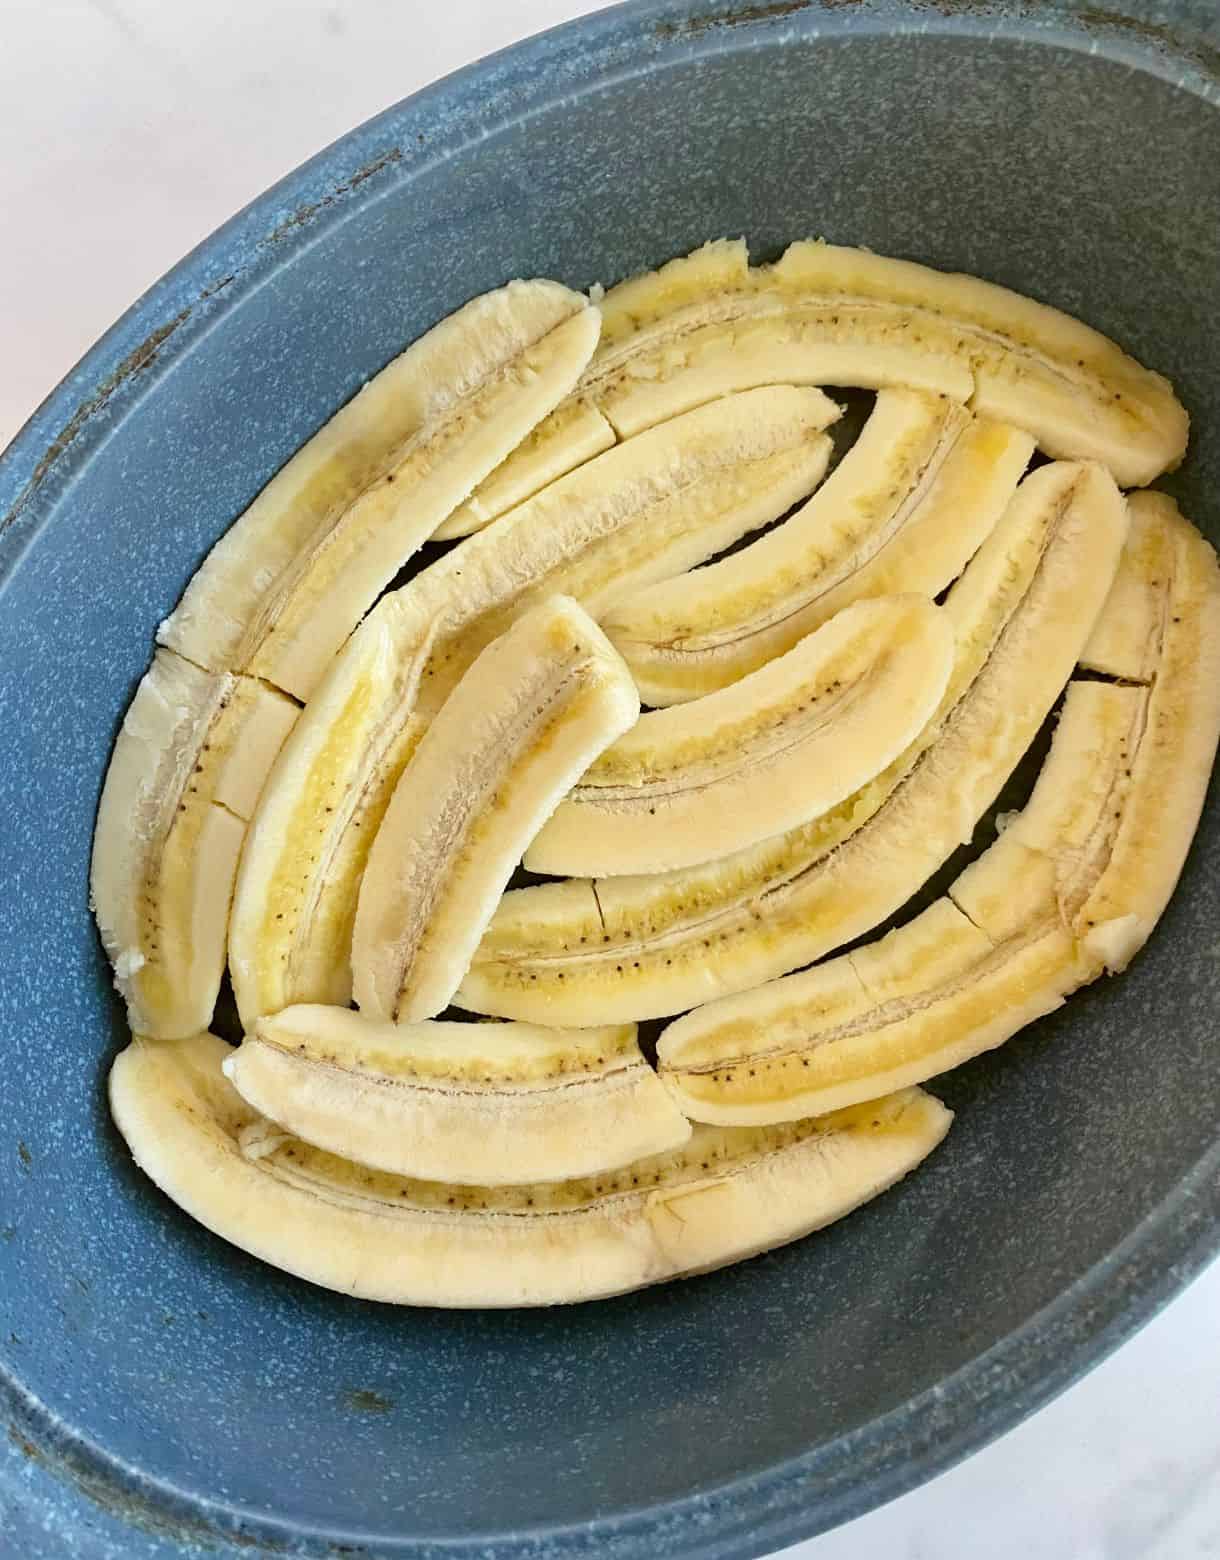 Sliced bananas in a dish ready to bake for Healthy Bananas Foster.